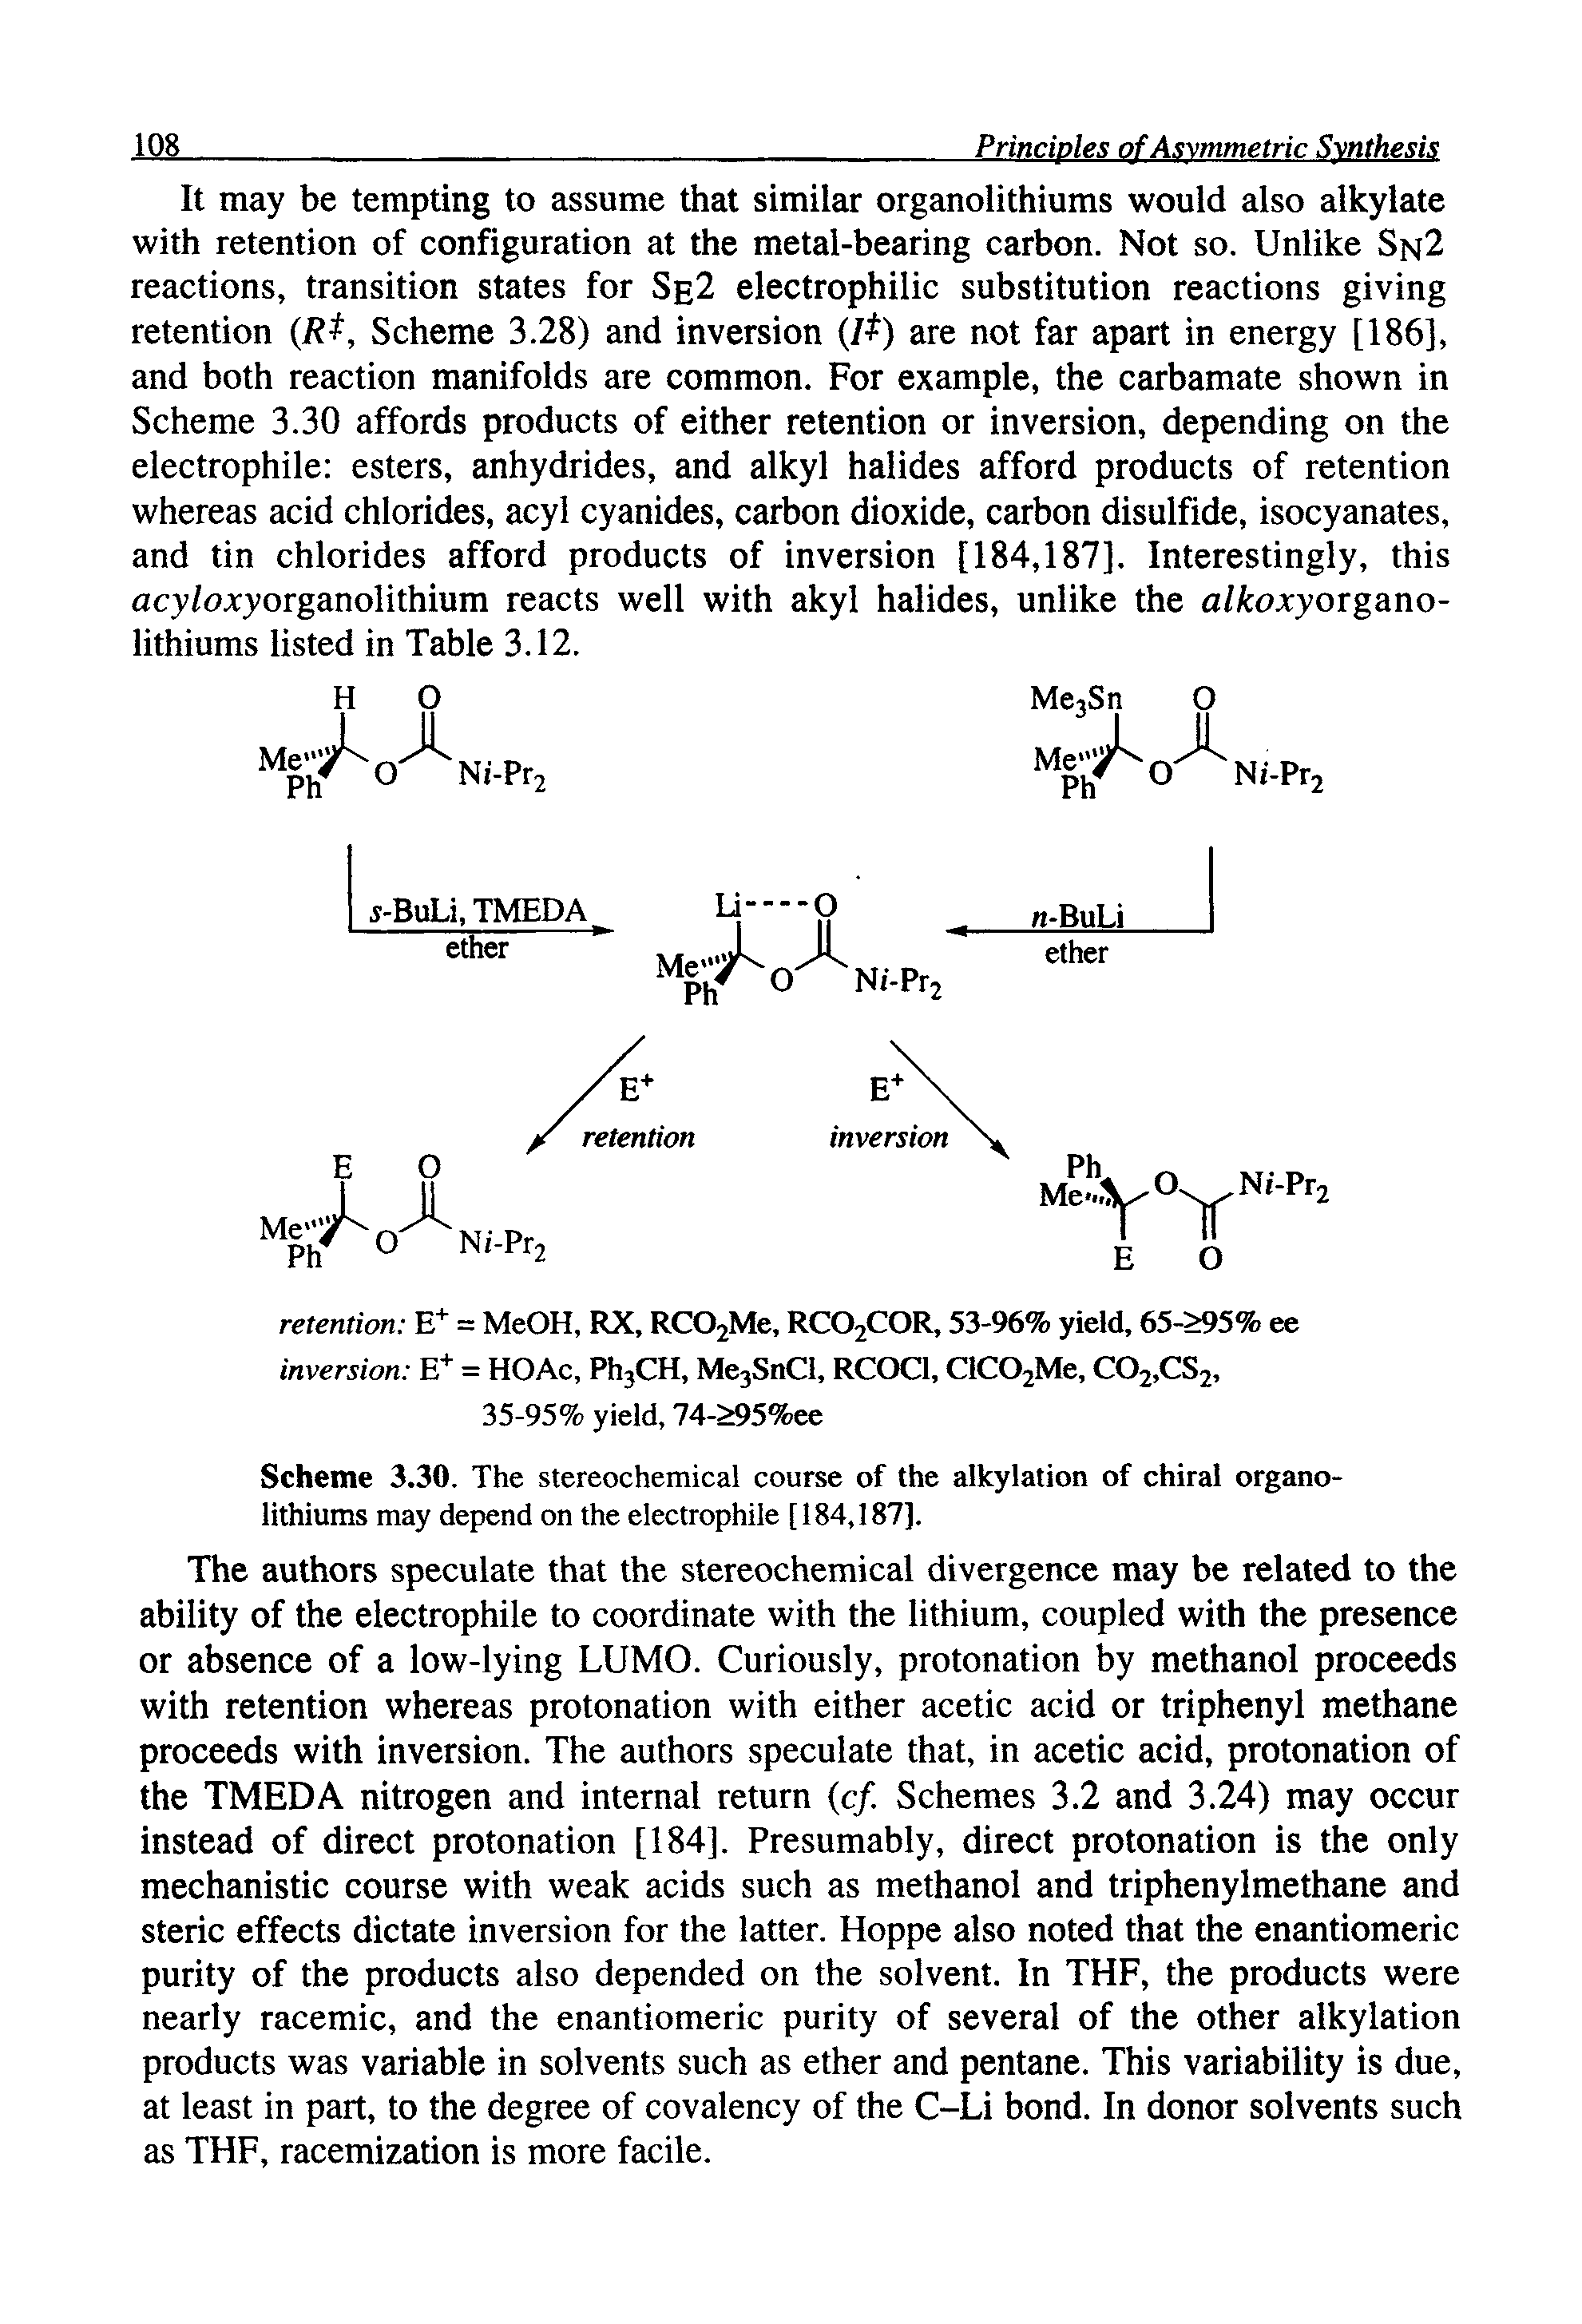 Scheme 3.30. The stereochemical course of the alkylation of chiral organolithiums may depend on the electrophile [184,187].